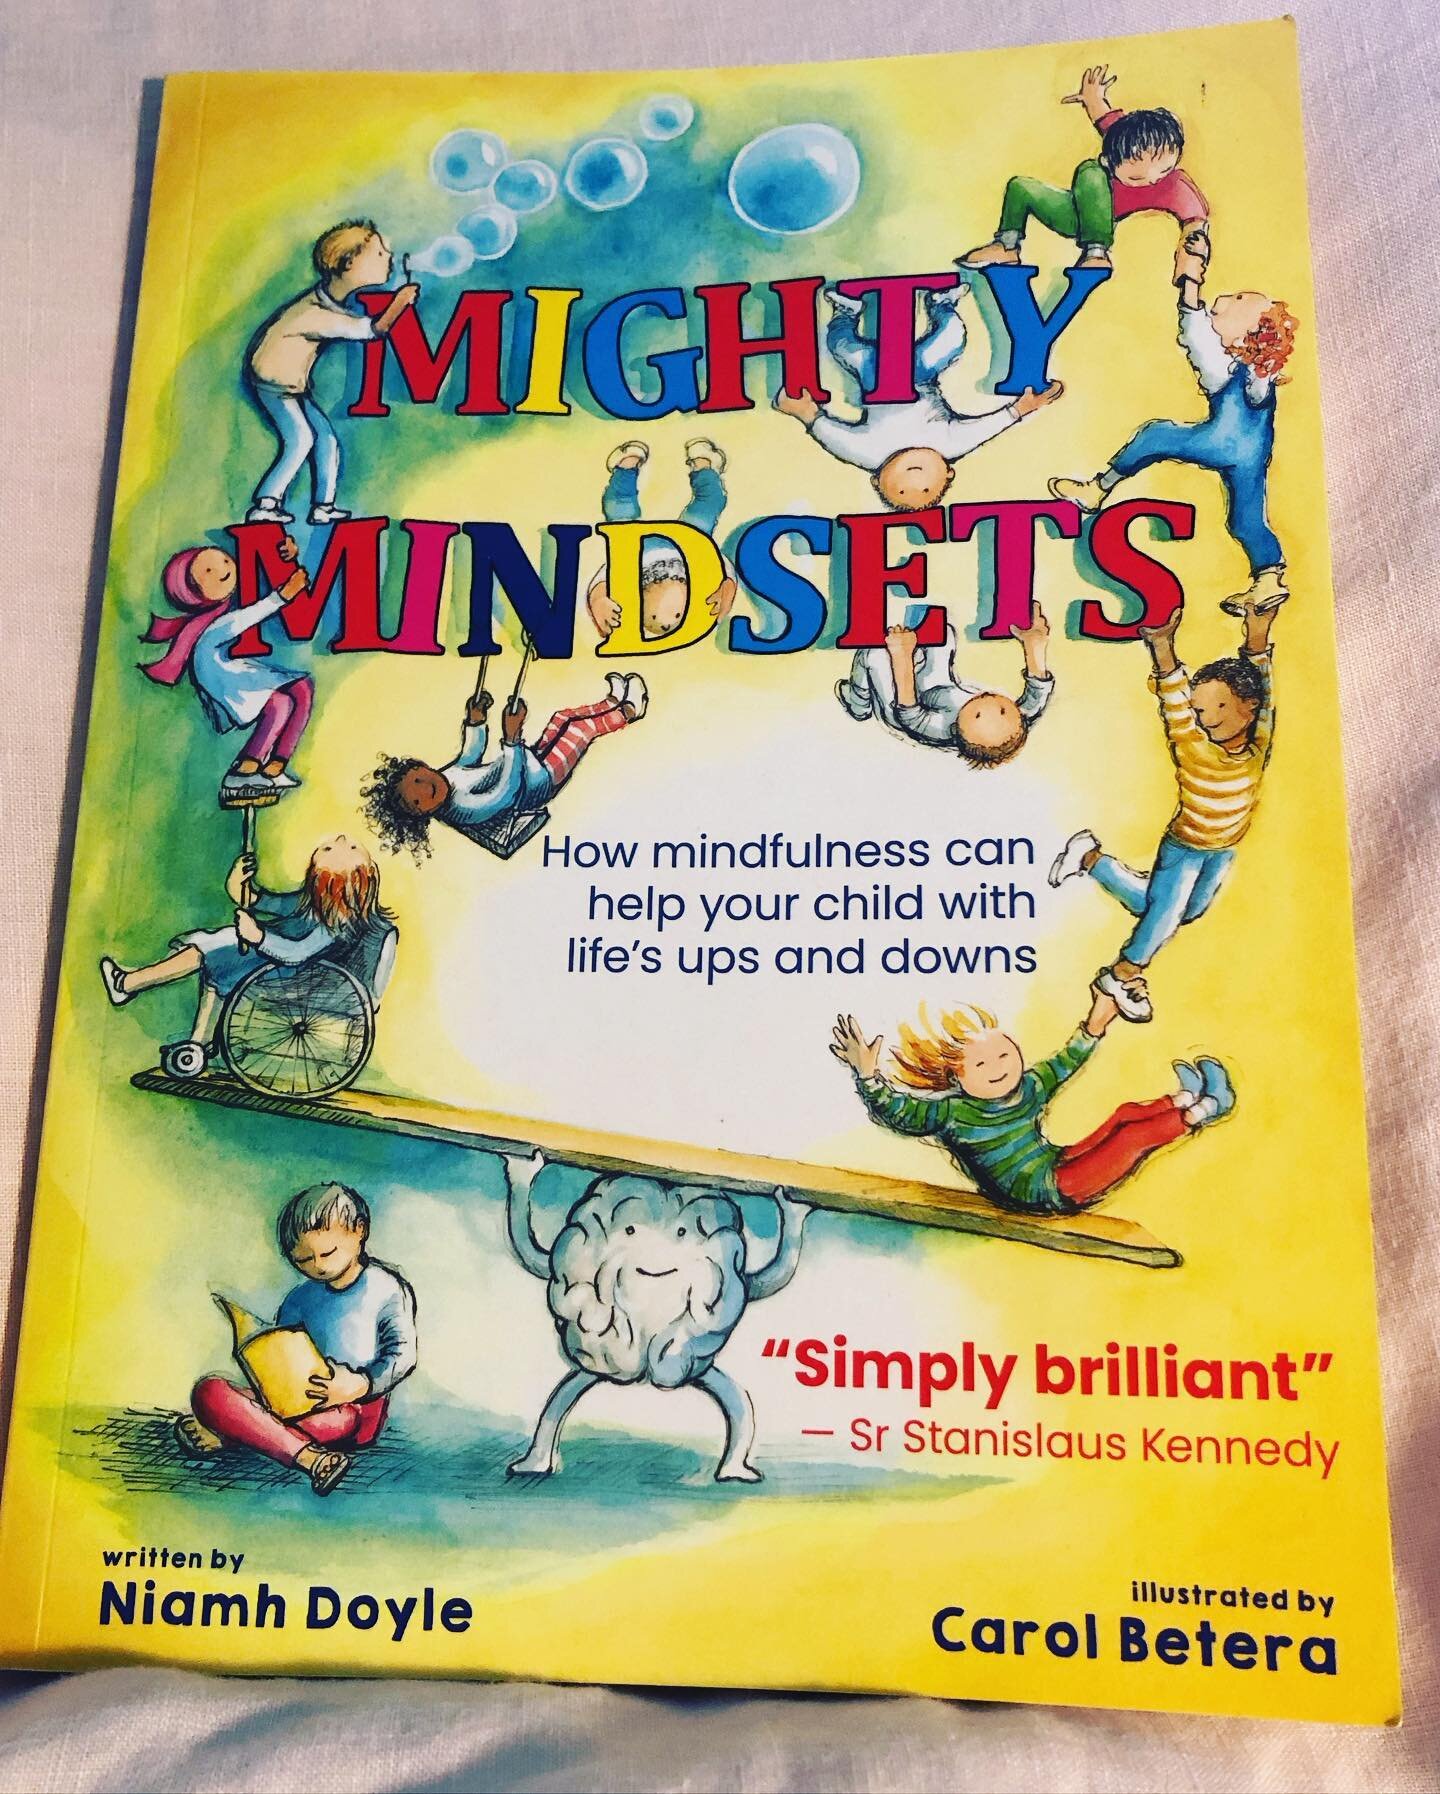 Mighty Mindsets by Niamh Doyle and illustrated by Carol Betera is all about our brains, how they work and how mindfulness can help us cope with what life throws at us. 
It&rsquo;s written in a clear and simple way and the information is carefully bro